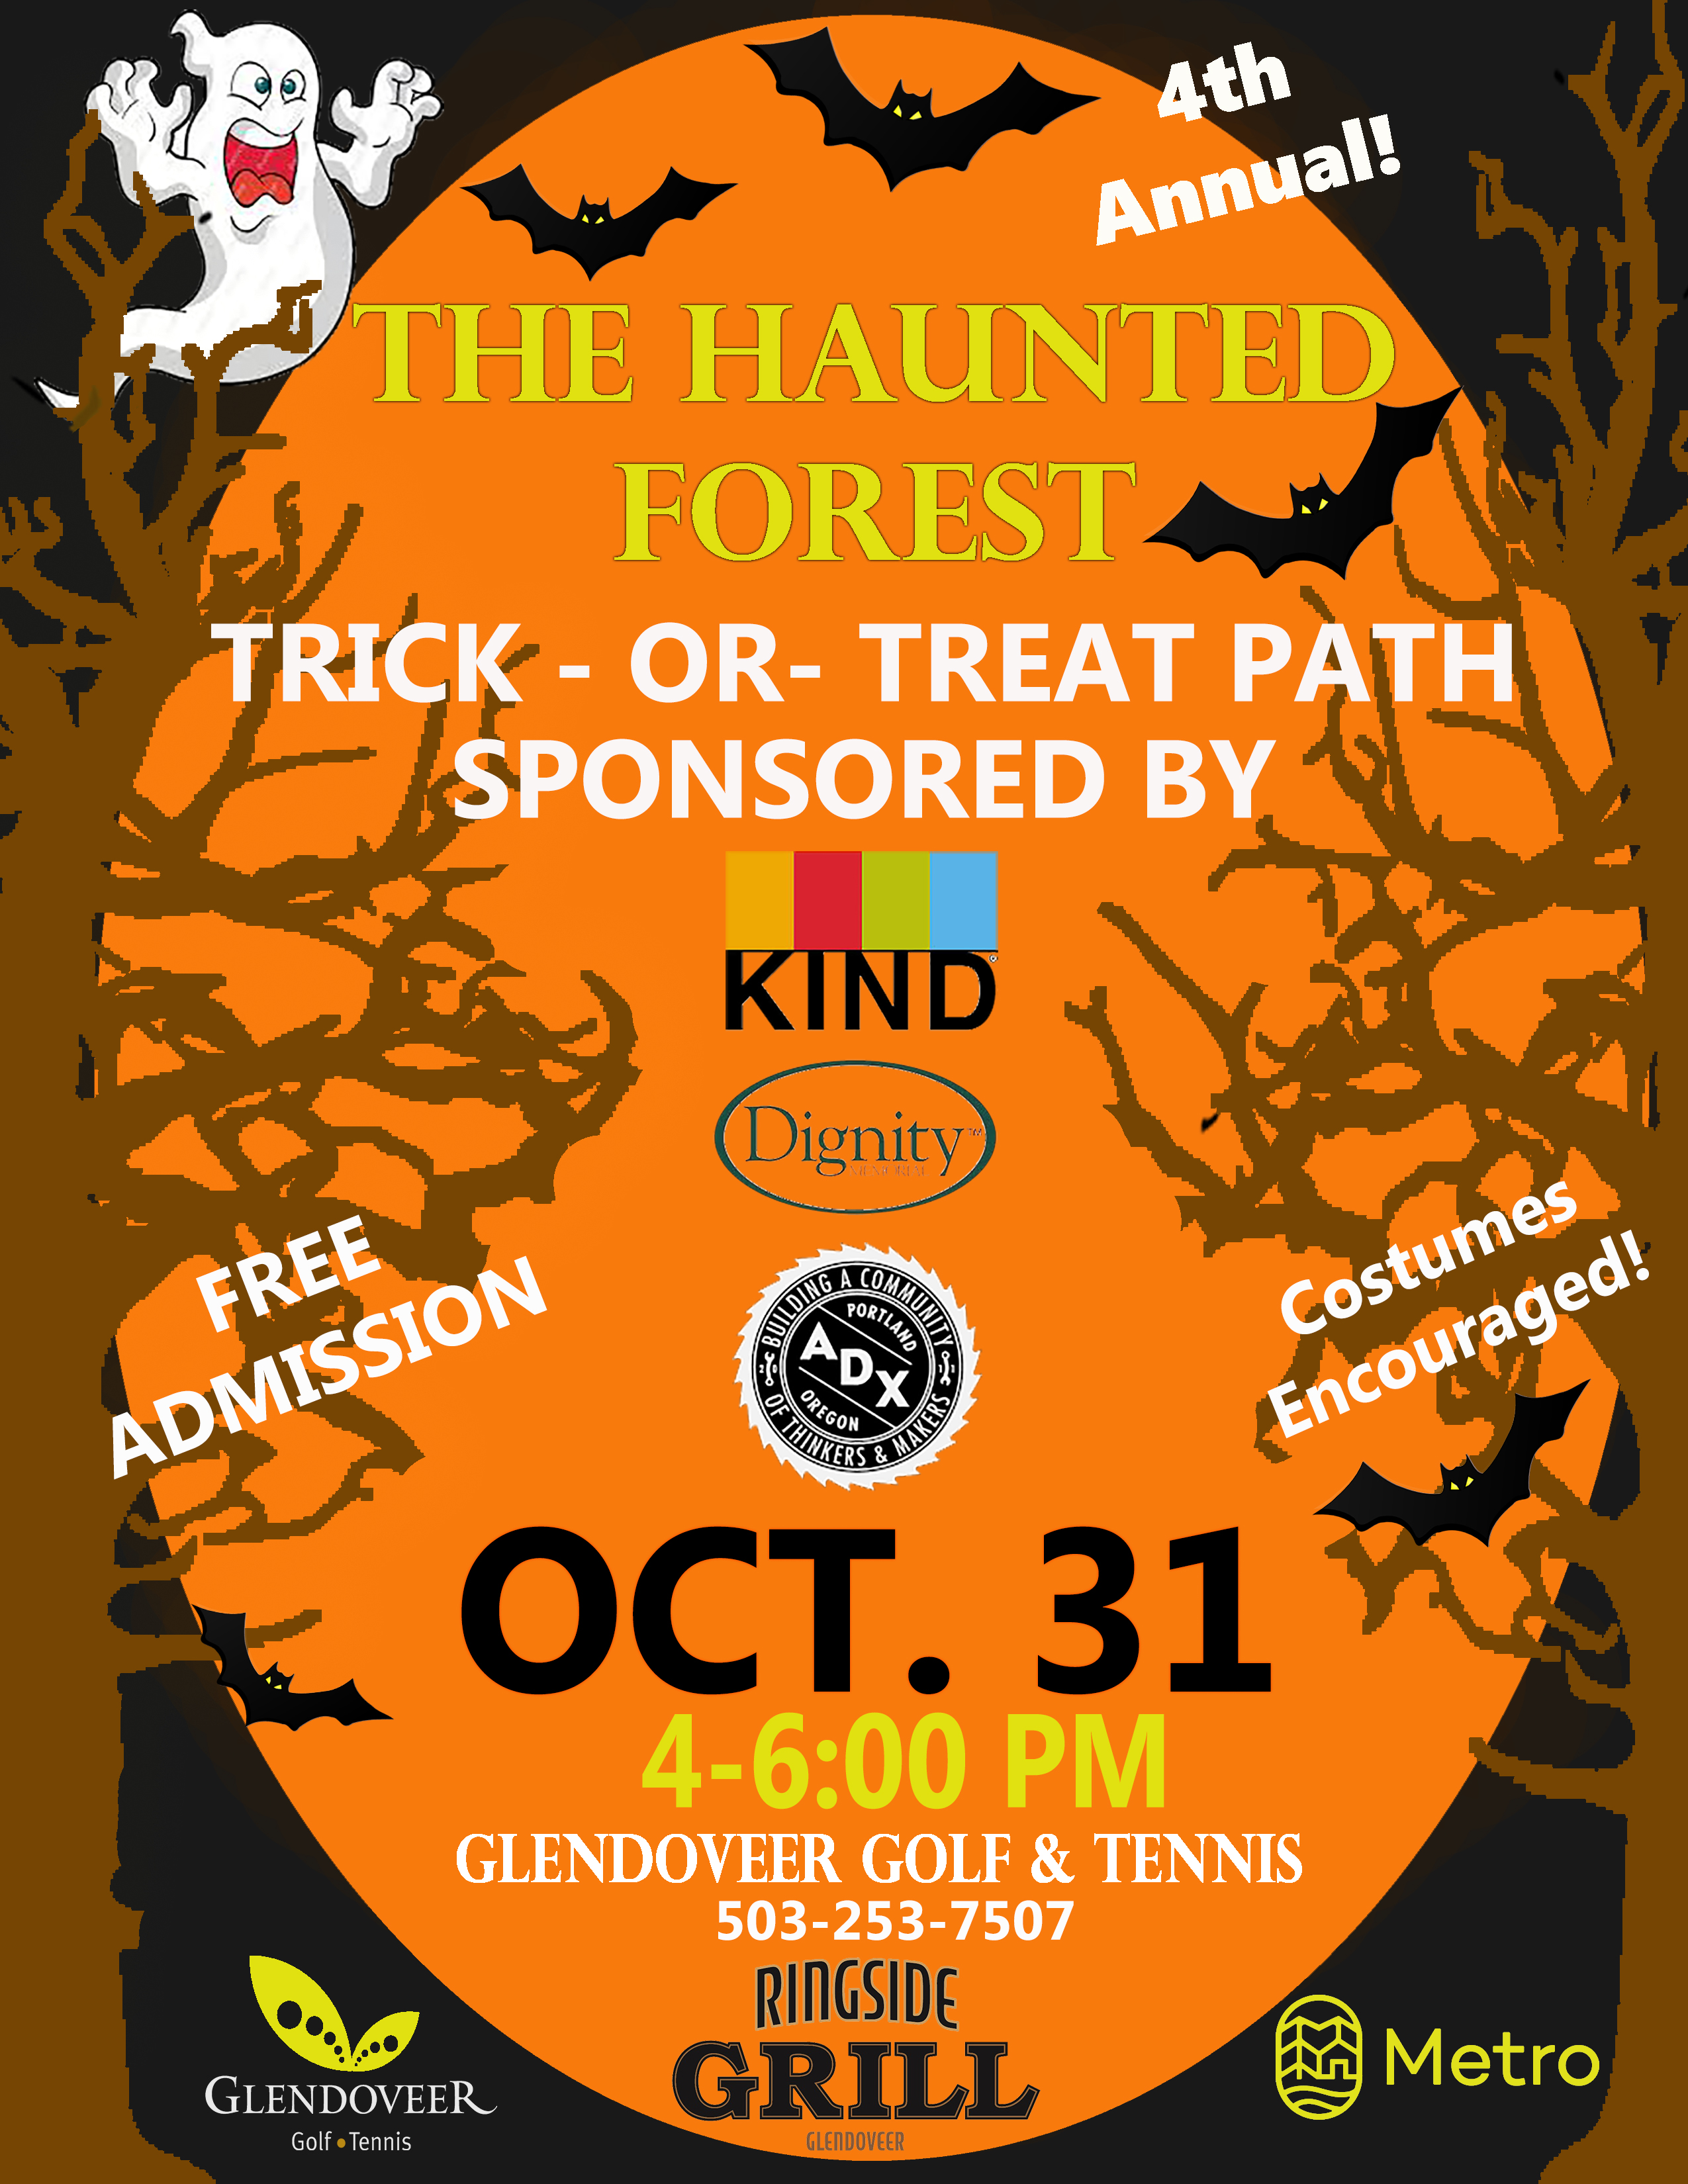 The Haunted Forest 2016